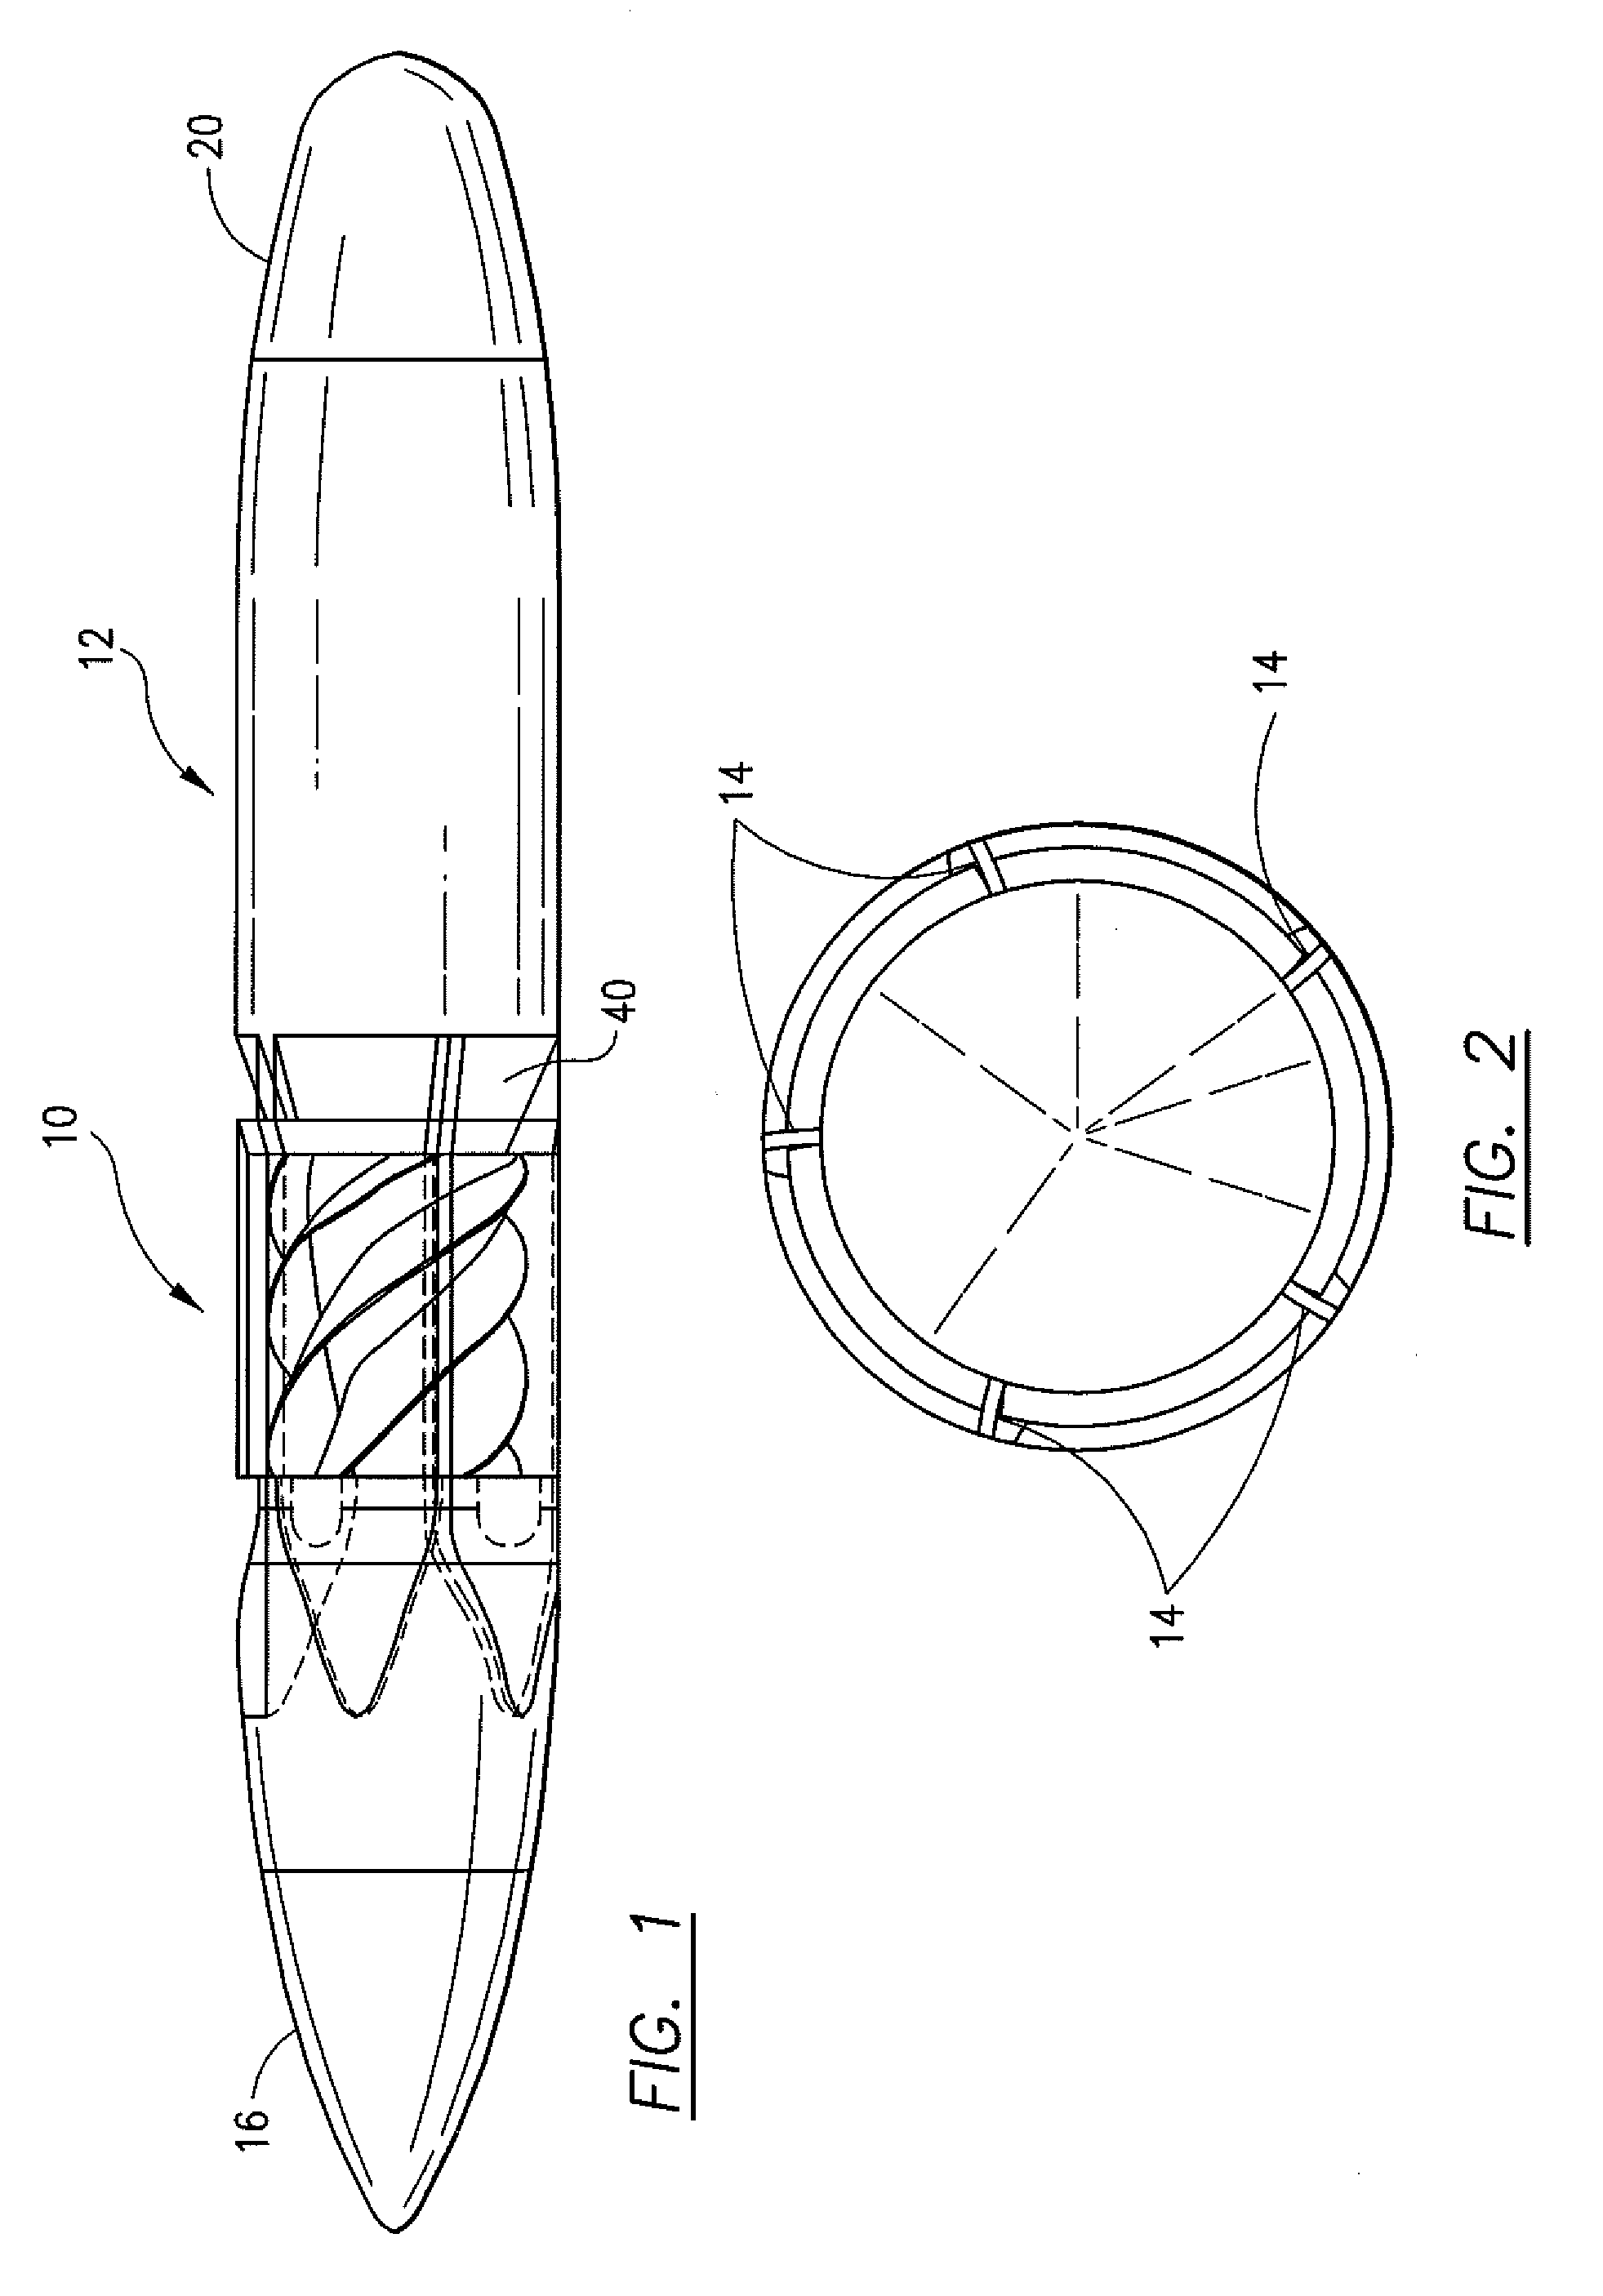 Hybrid ram air turbine with inlet guide vanes